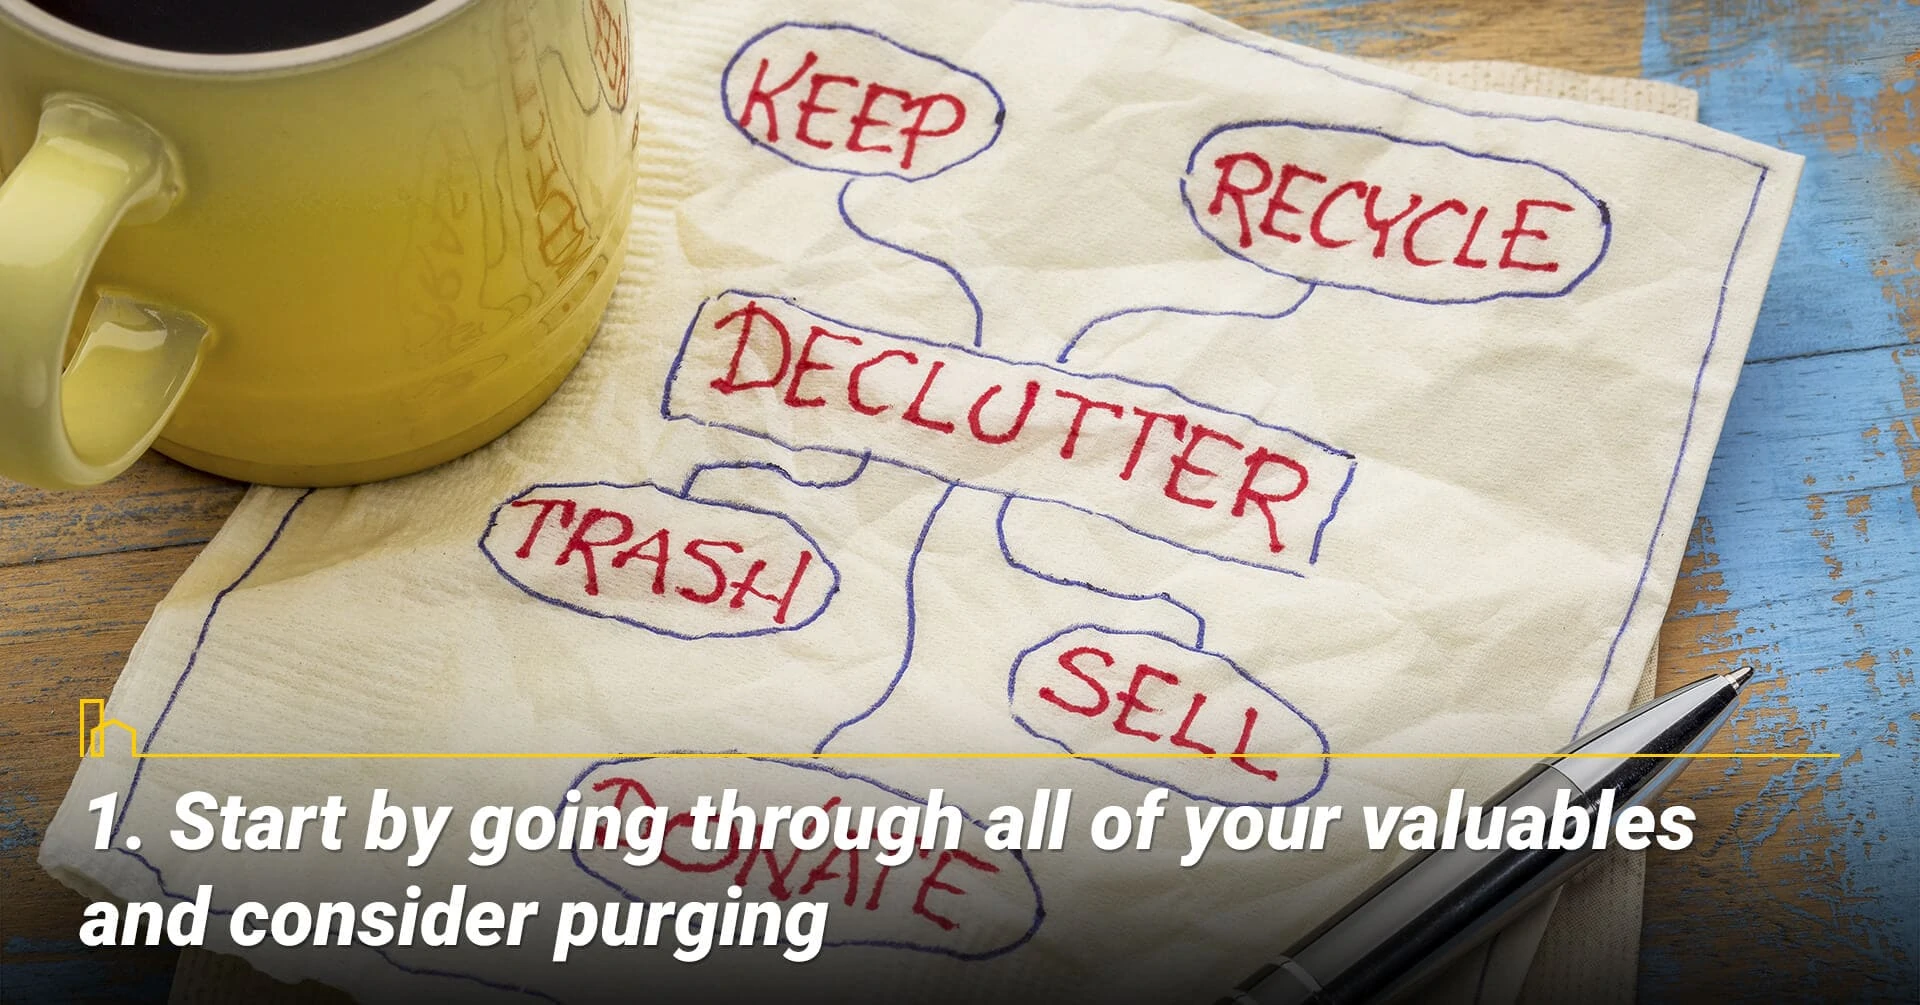 Start by going through all of your valuables and consider purging, find a home for every items in your home